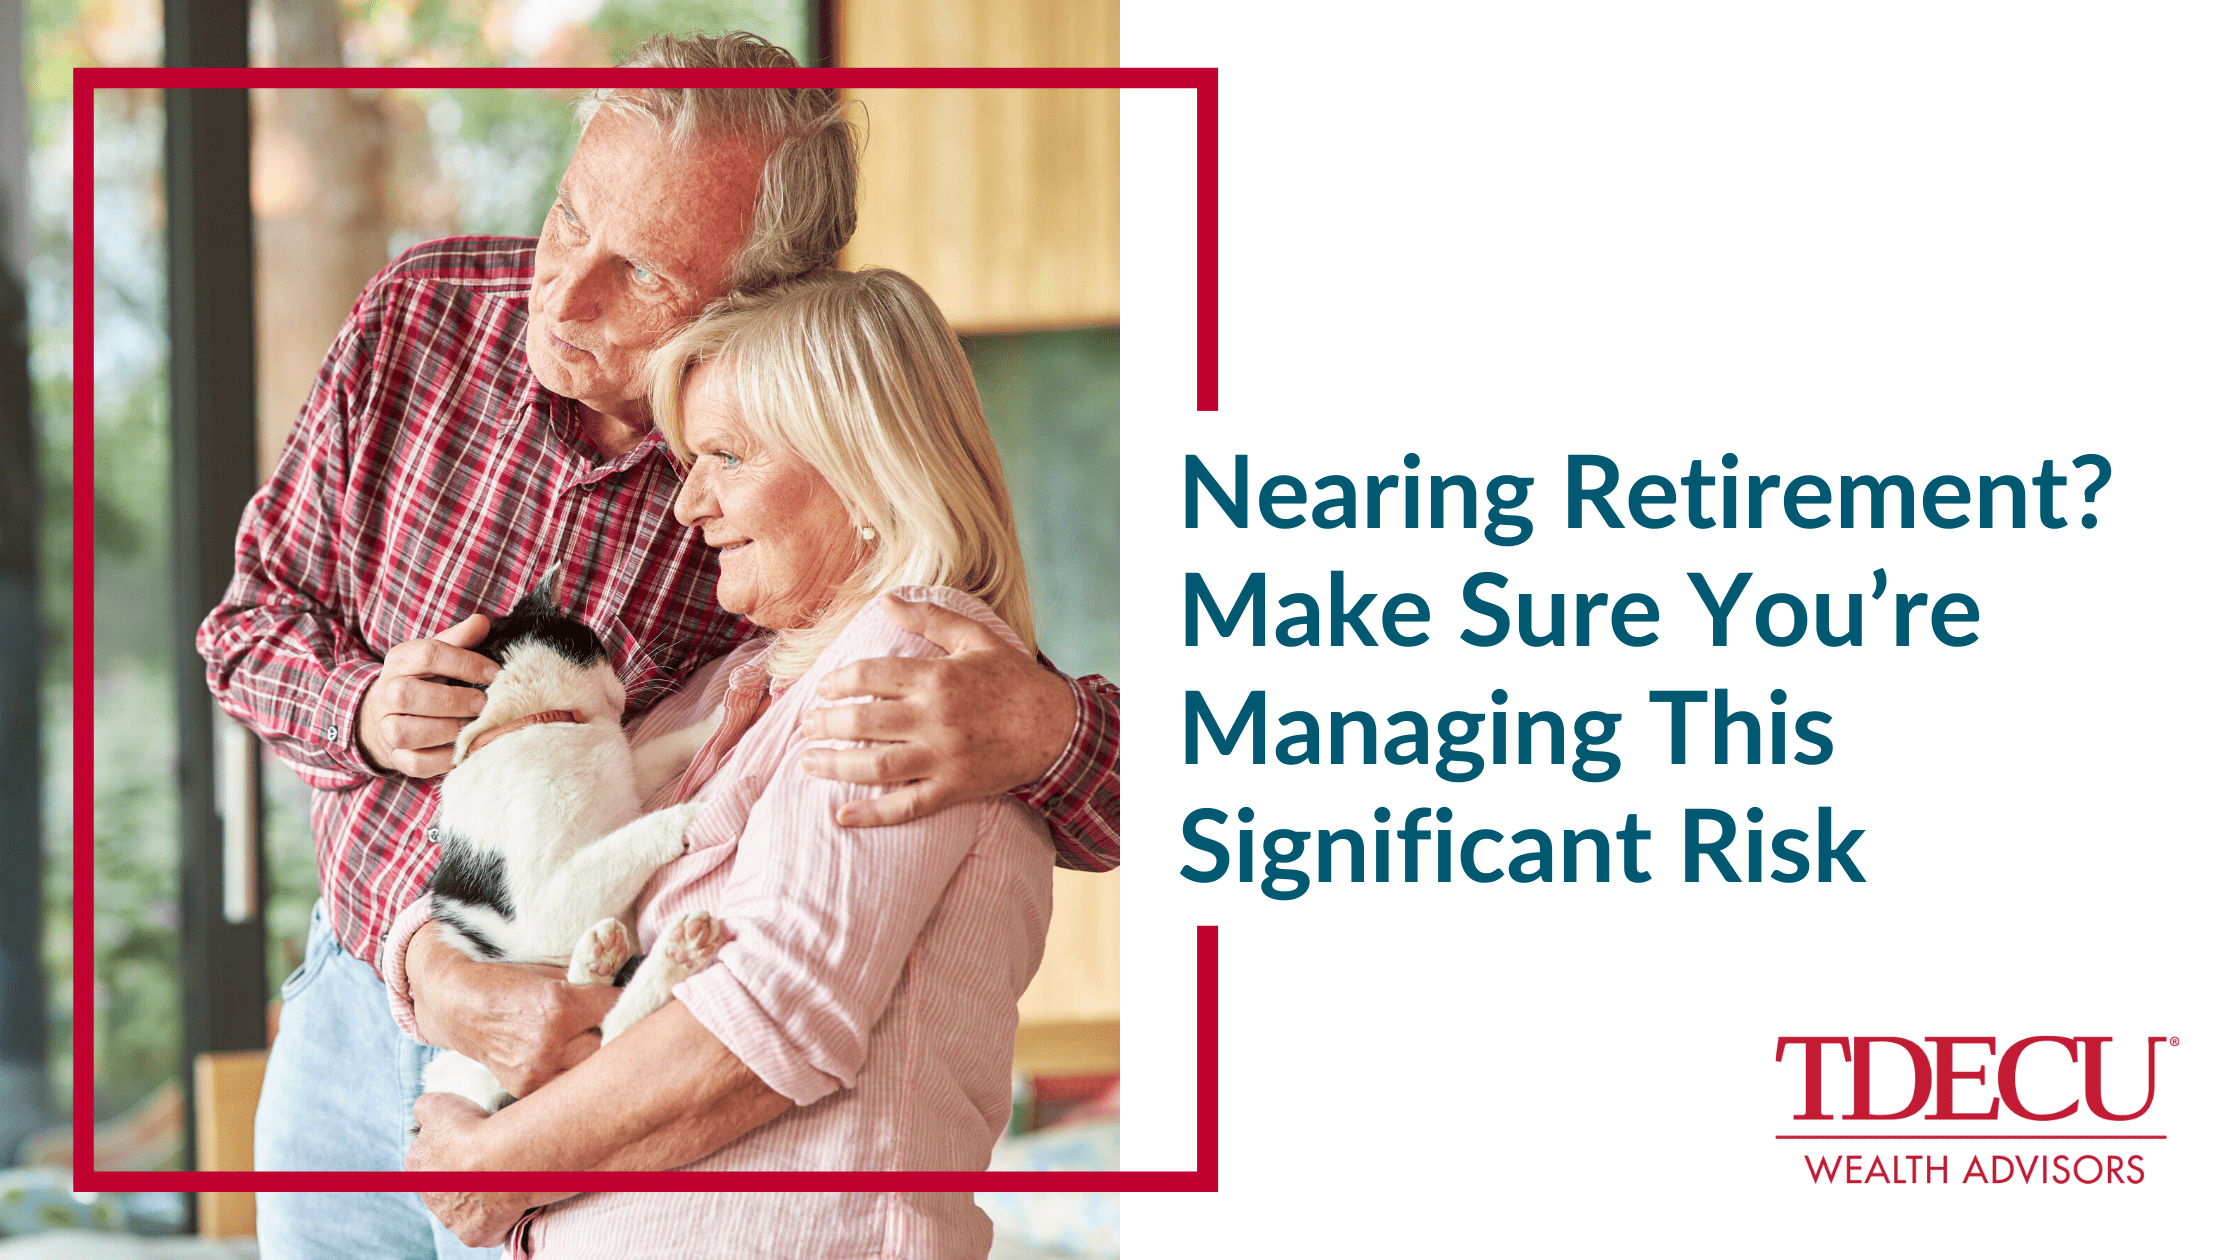 Nearing Retirement? Make Sure You’re Managing This Significant Risk